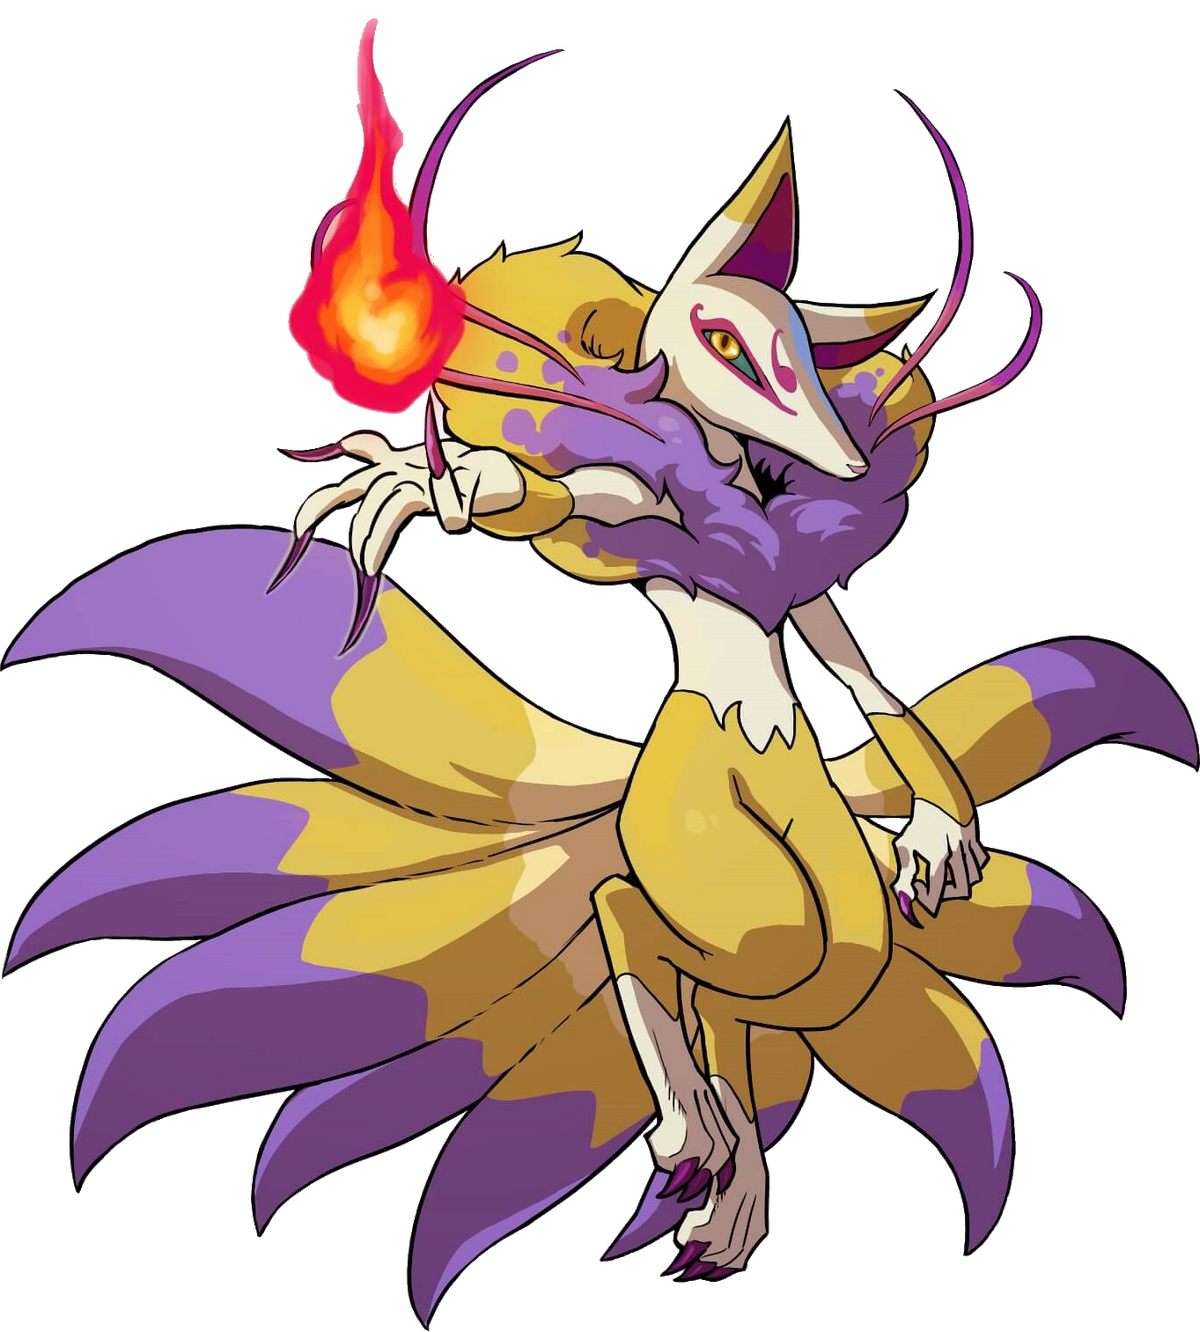 I got a sudden urge to fuse kyubi and venoct, the first one has kyubi as  the base and the second one has venoct : r/yokaiwatch